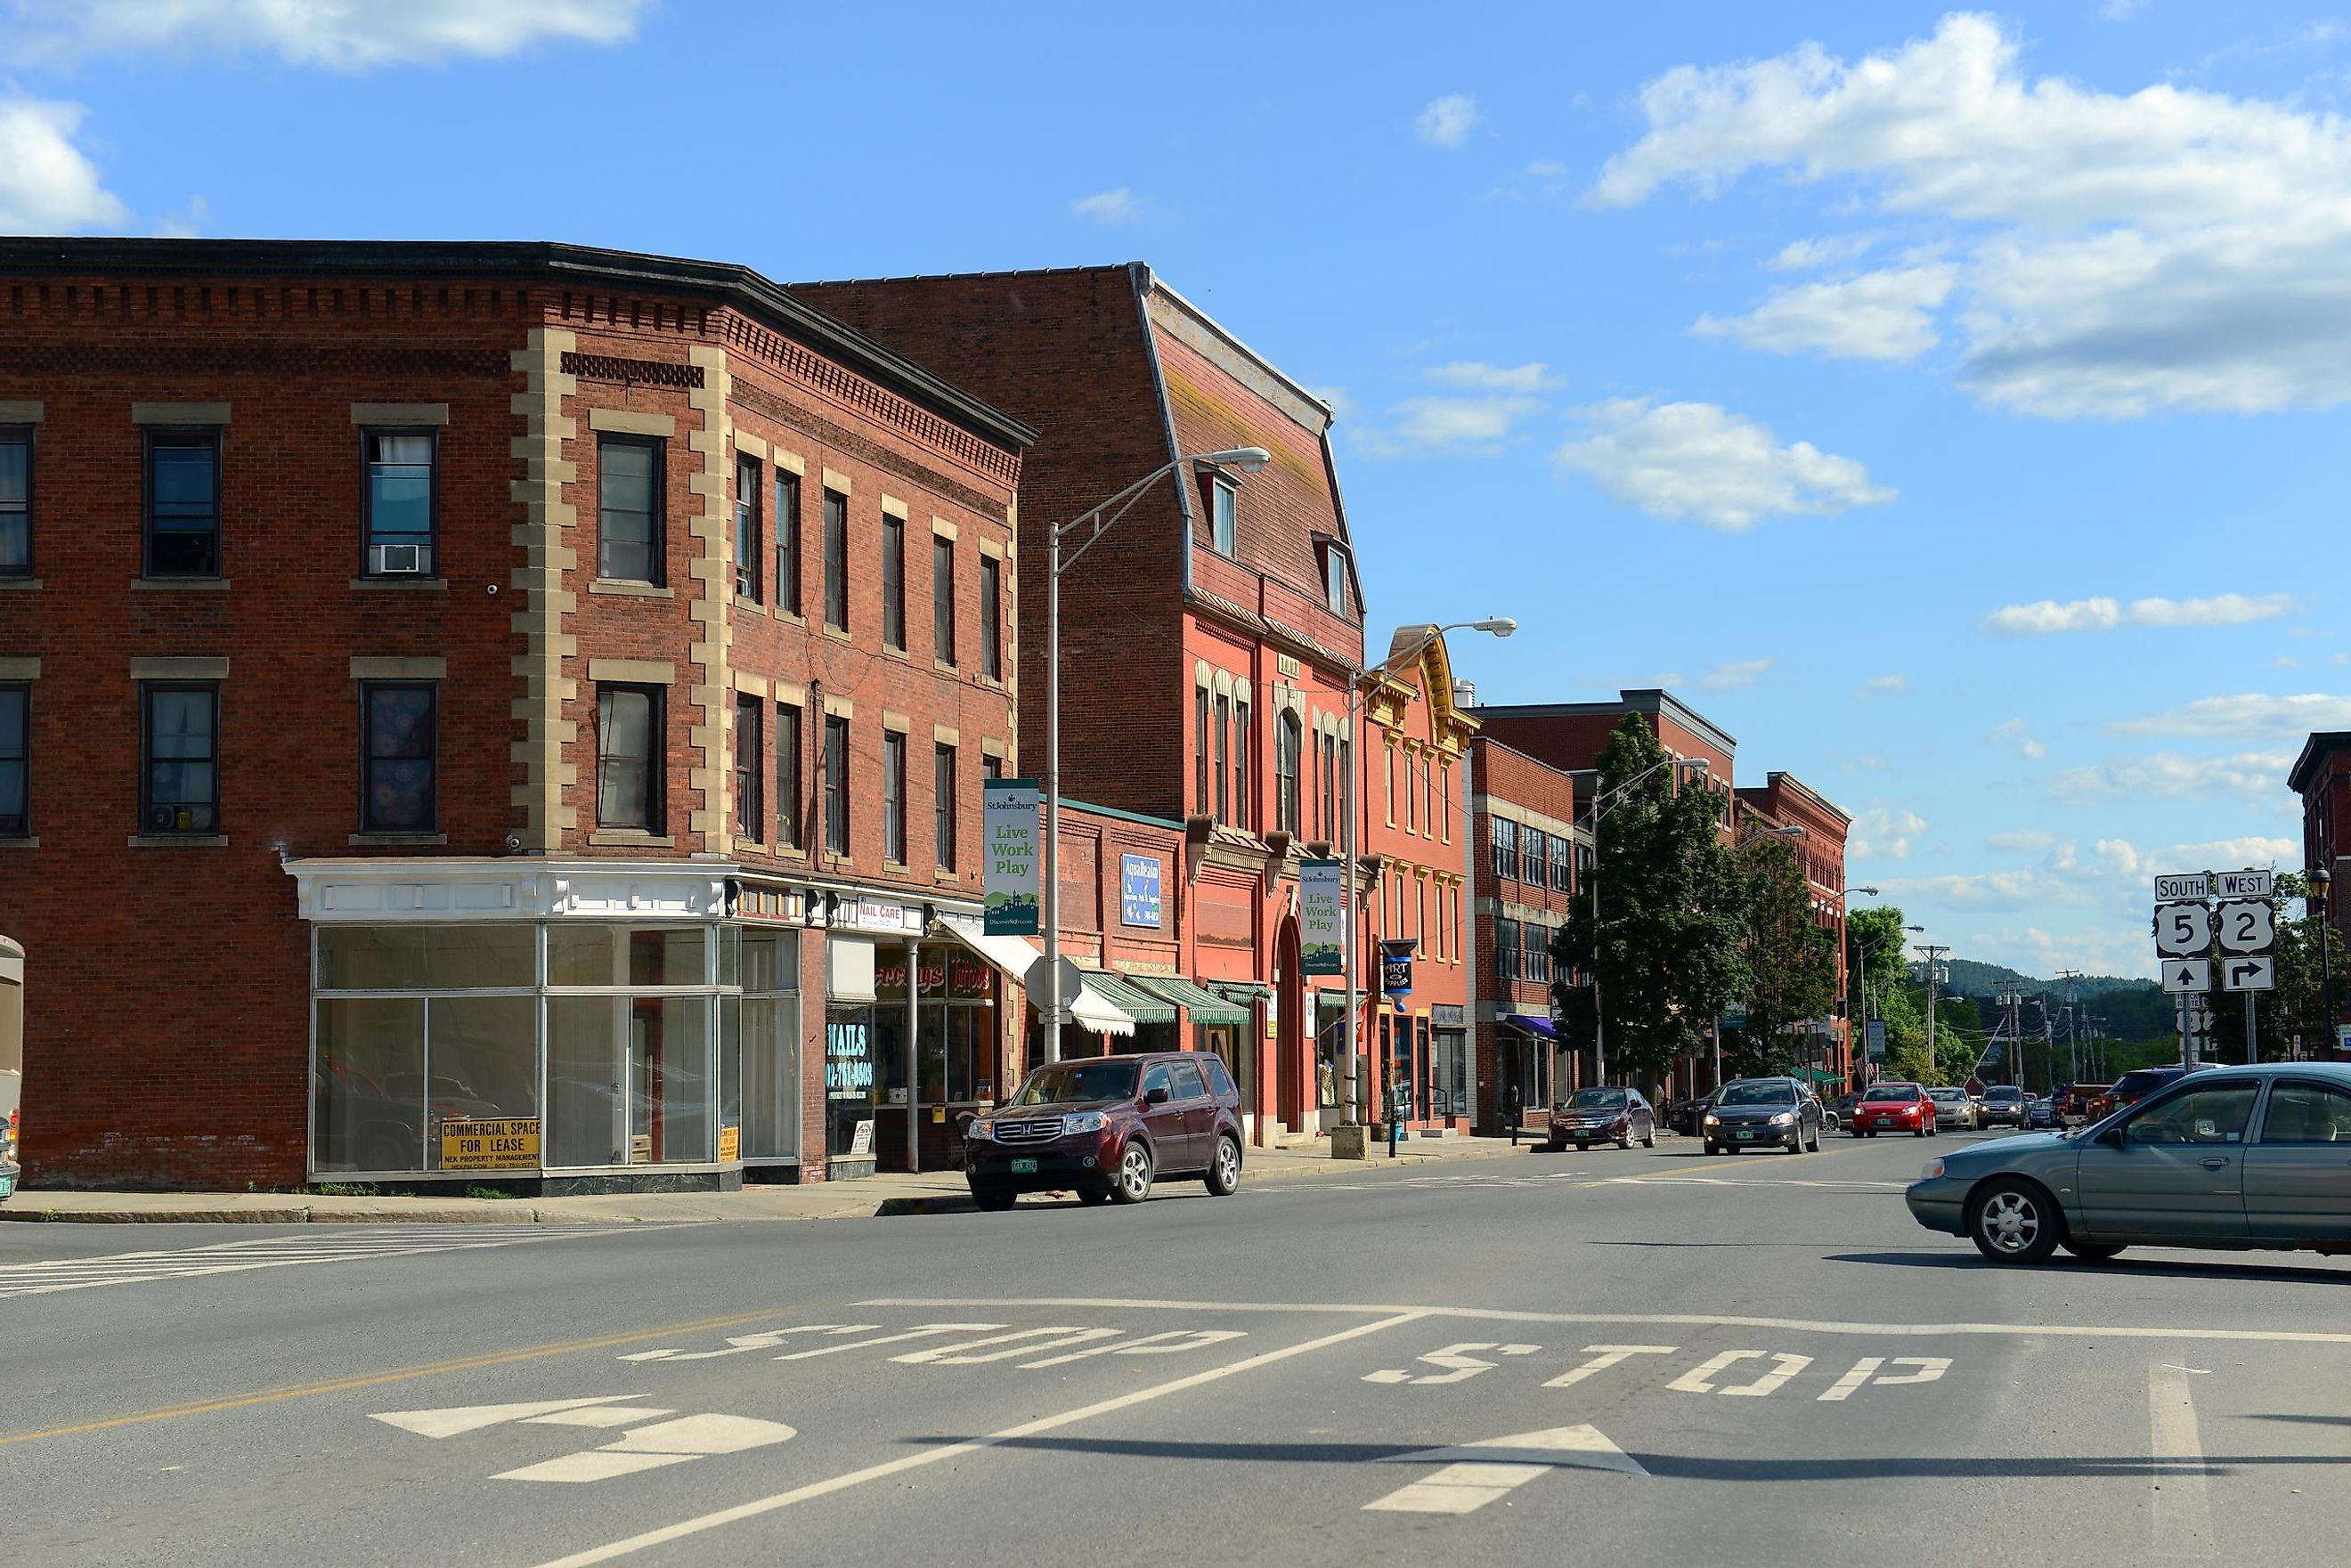 Historic Buildings on Railroad Street in downtown St. Johnsbury, Vermont